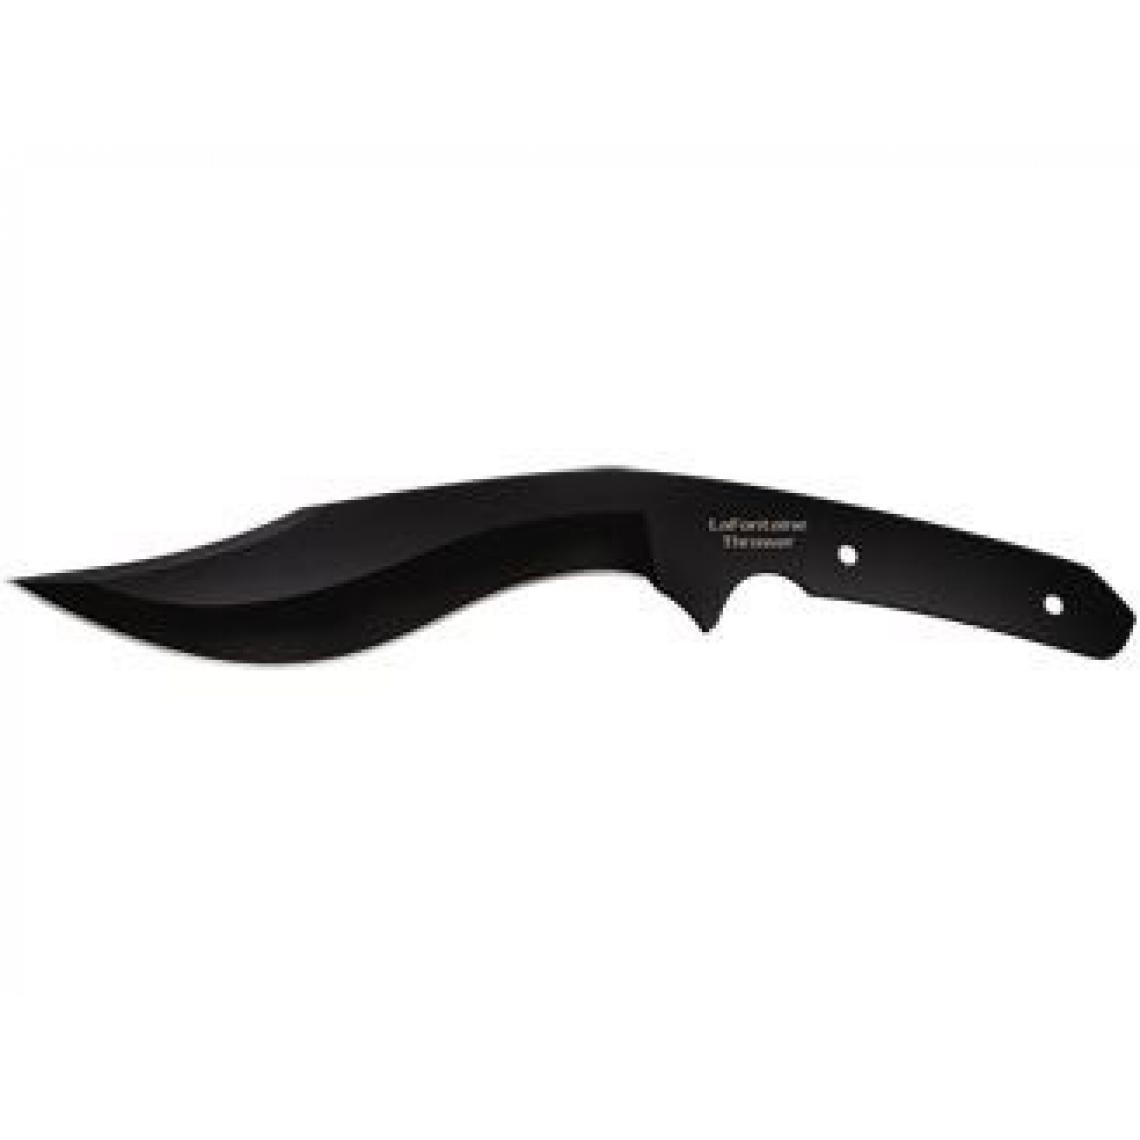 Divers Marques - Cold Steel LA FONTAINE THROWER 80TLFZ - Outils de coupe